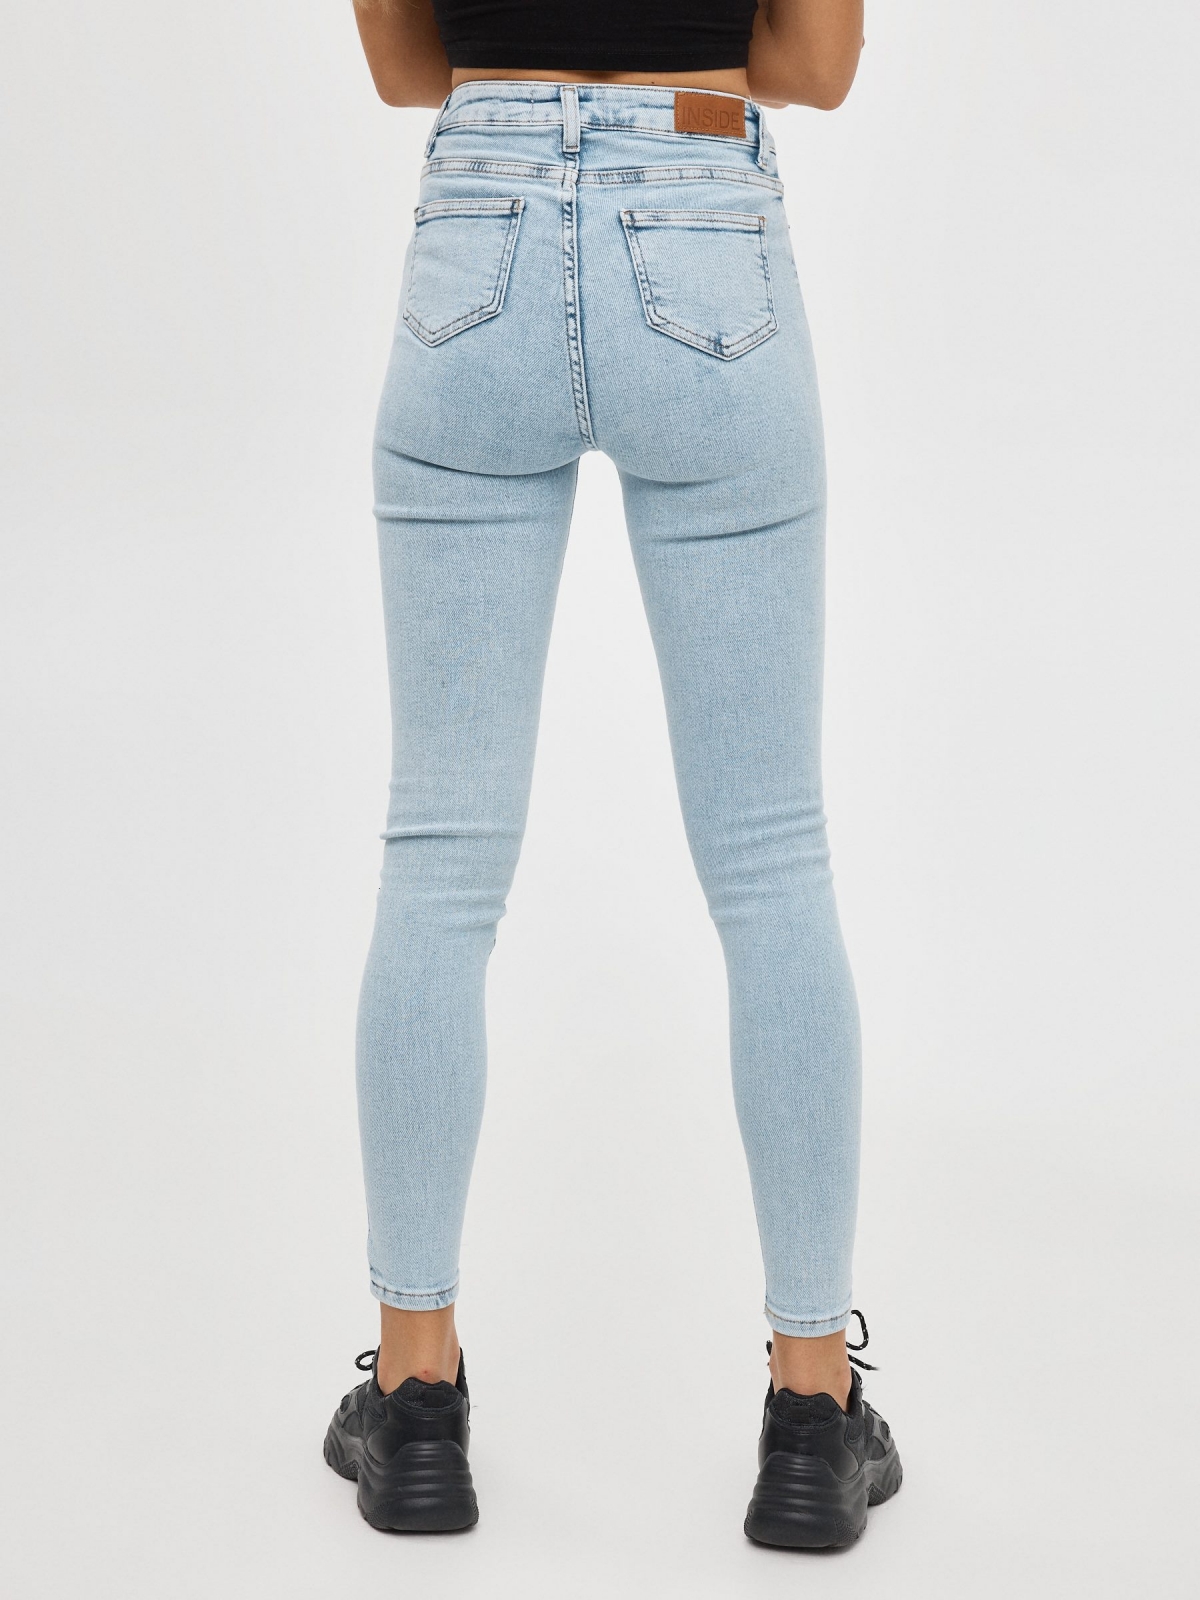 High rise skinny jeans light blue middle back view